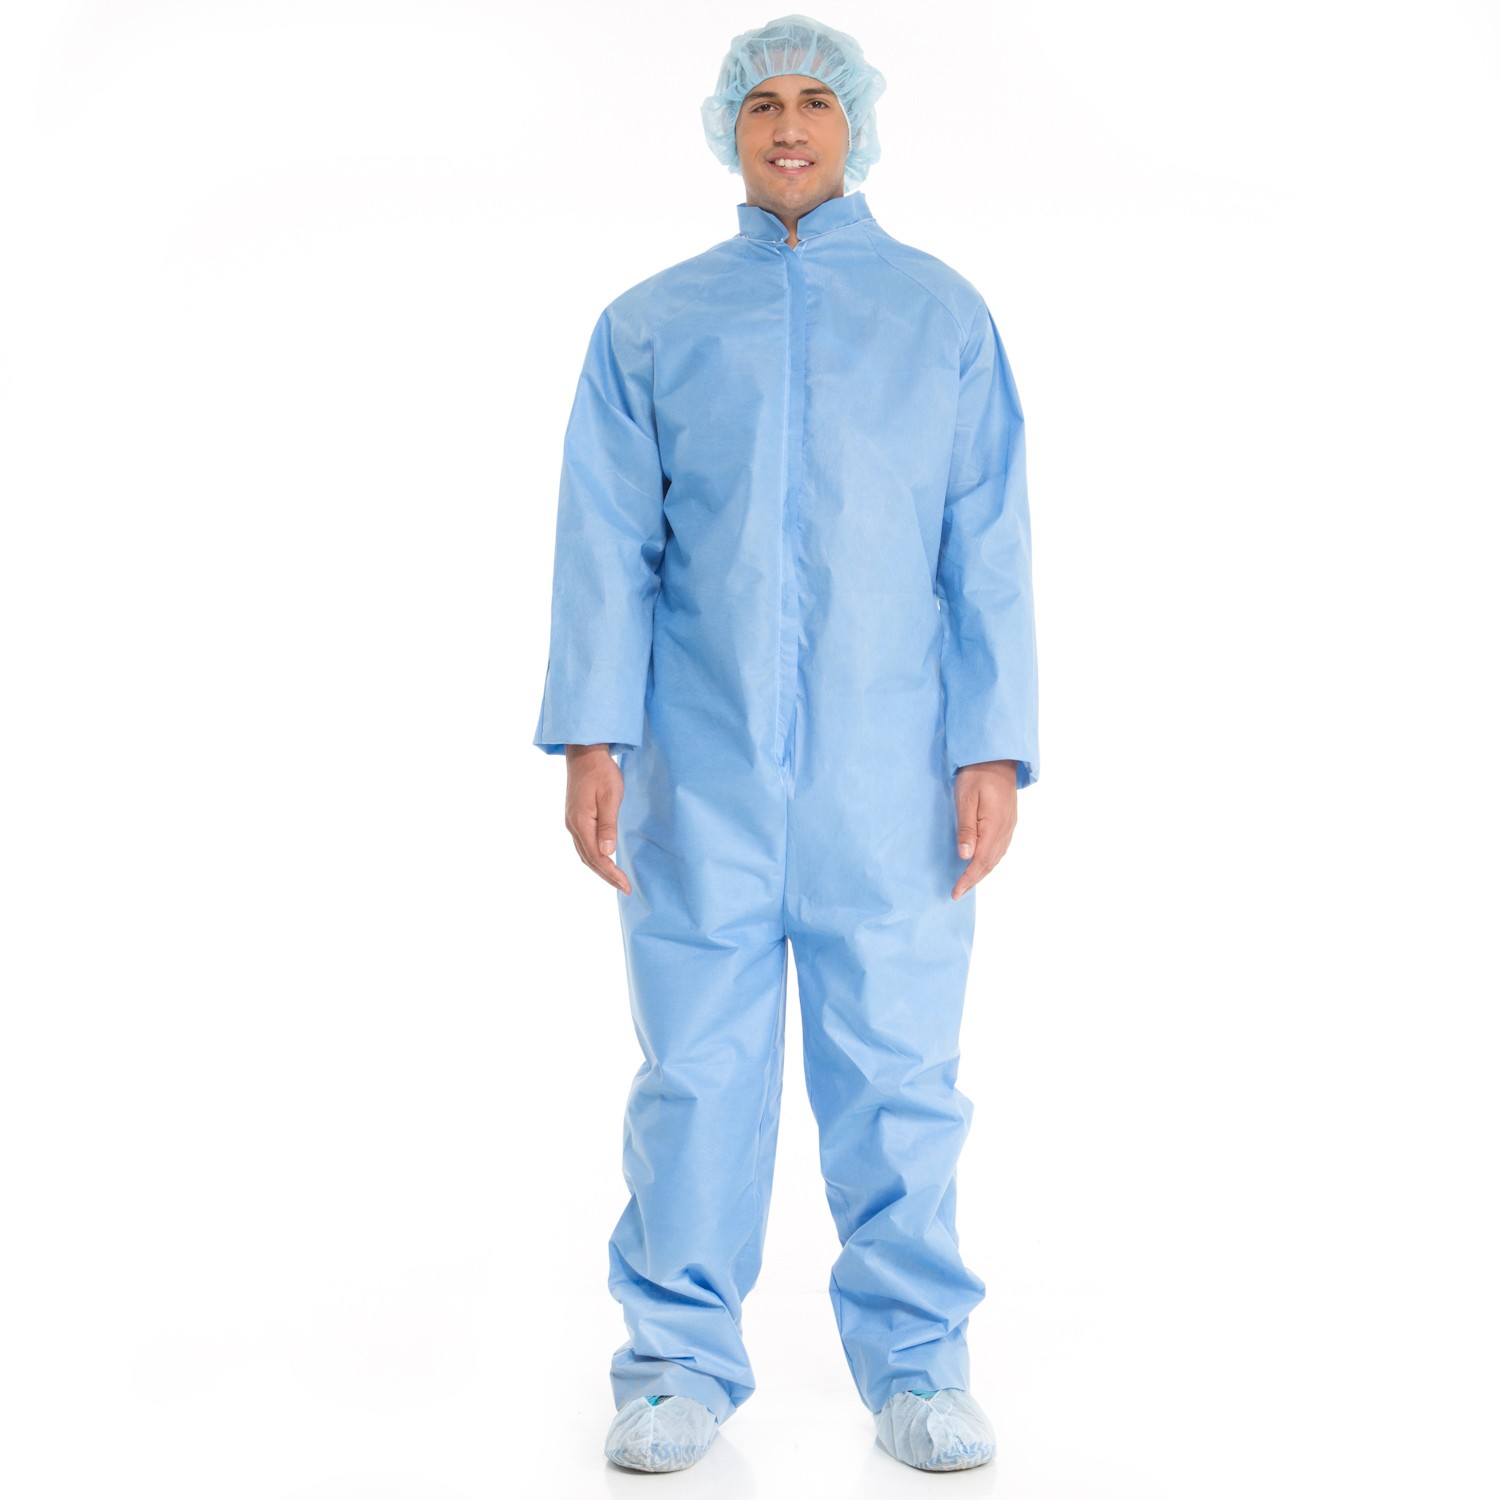 HALYARD Health Protective Coveralls